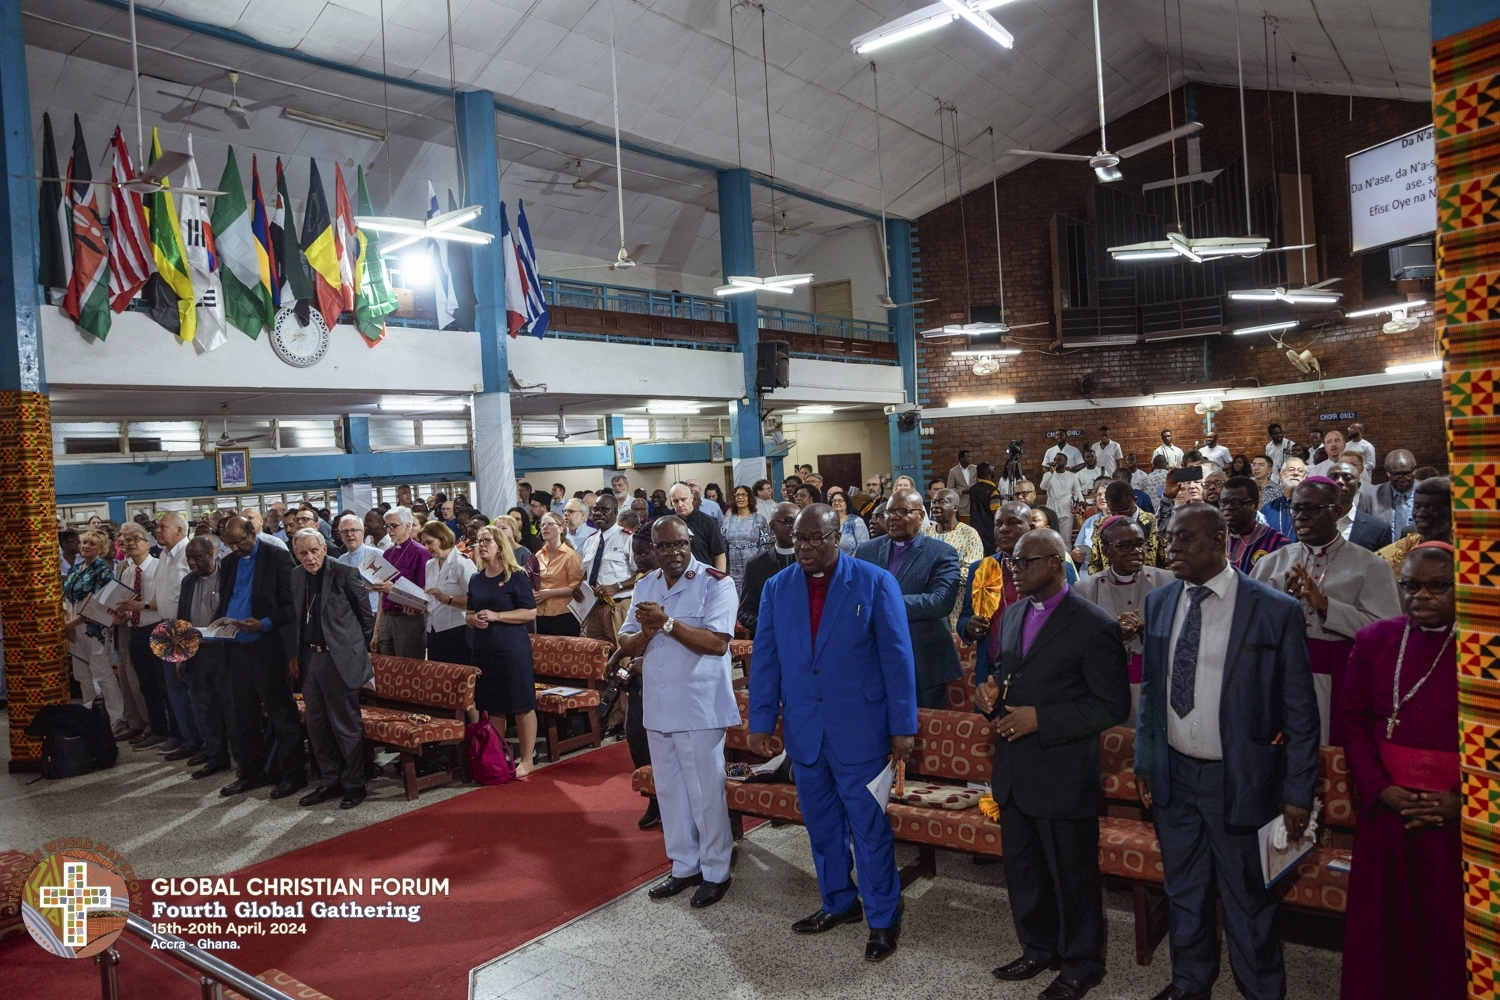 The Fourth Global Gathering was held in Accra, Ghana by the Global Christian Forum